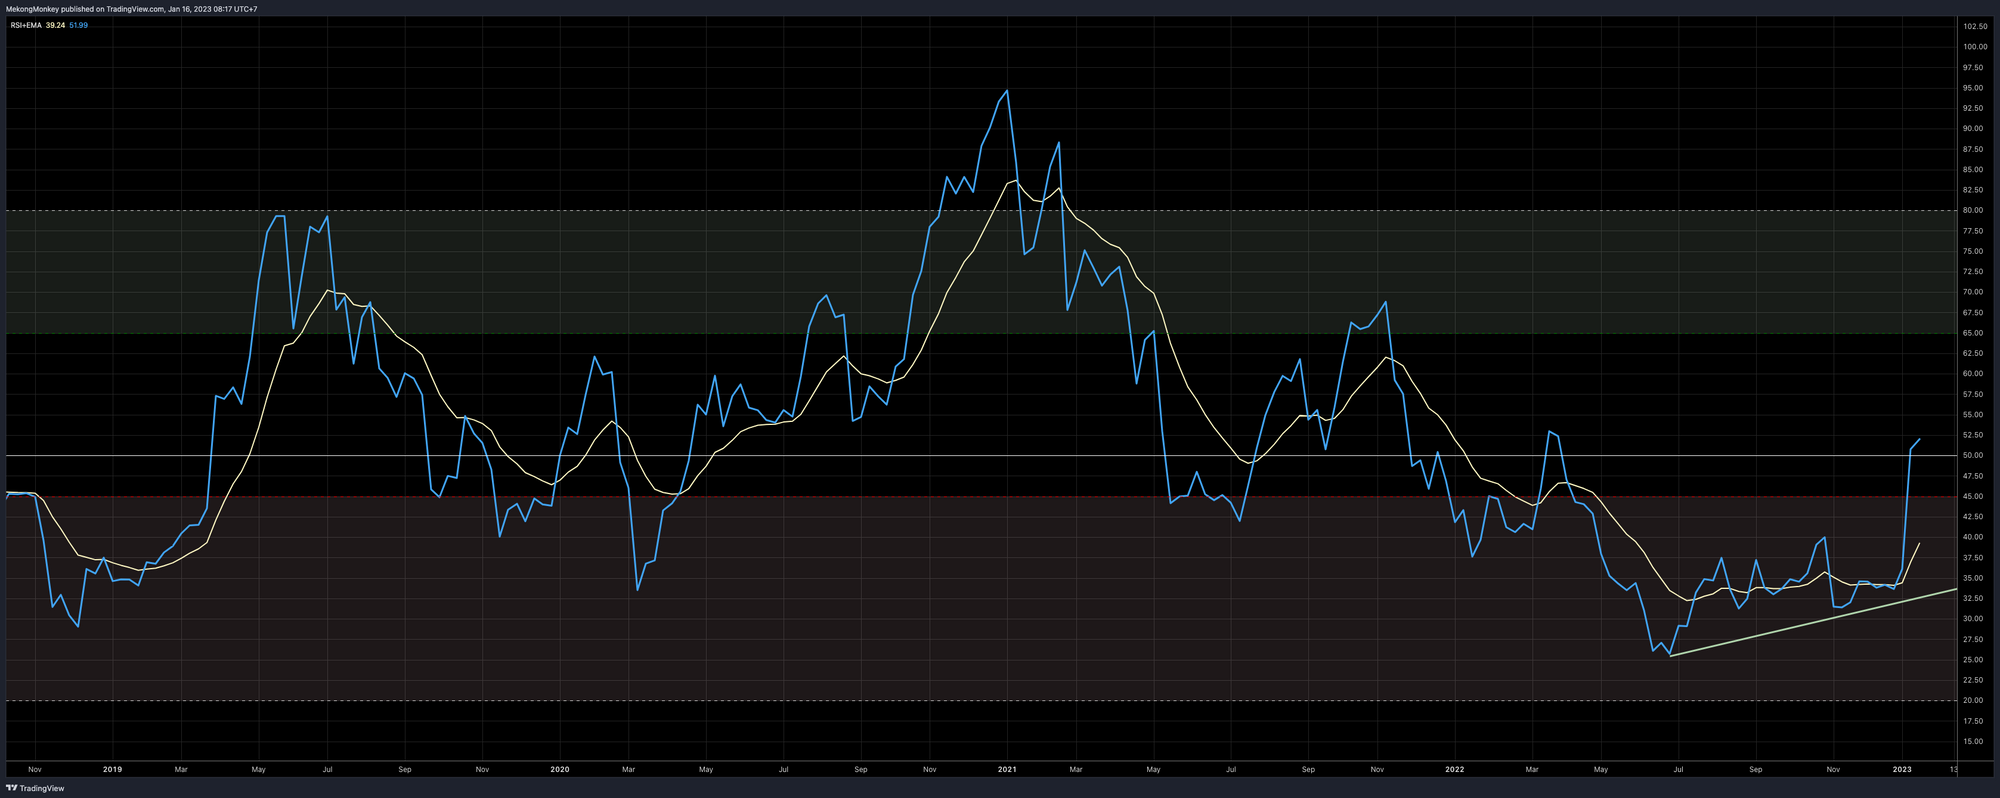 BTCUSD, the weekly RSI